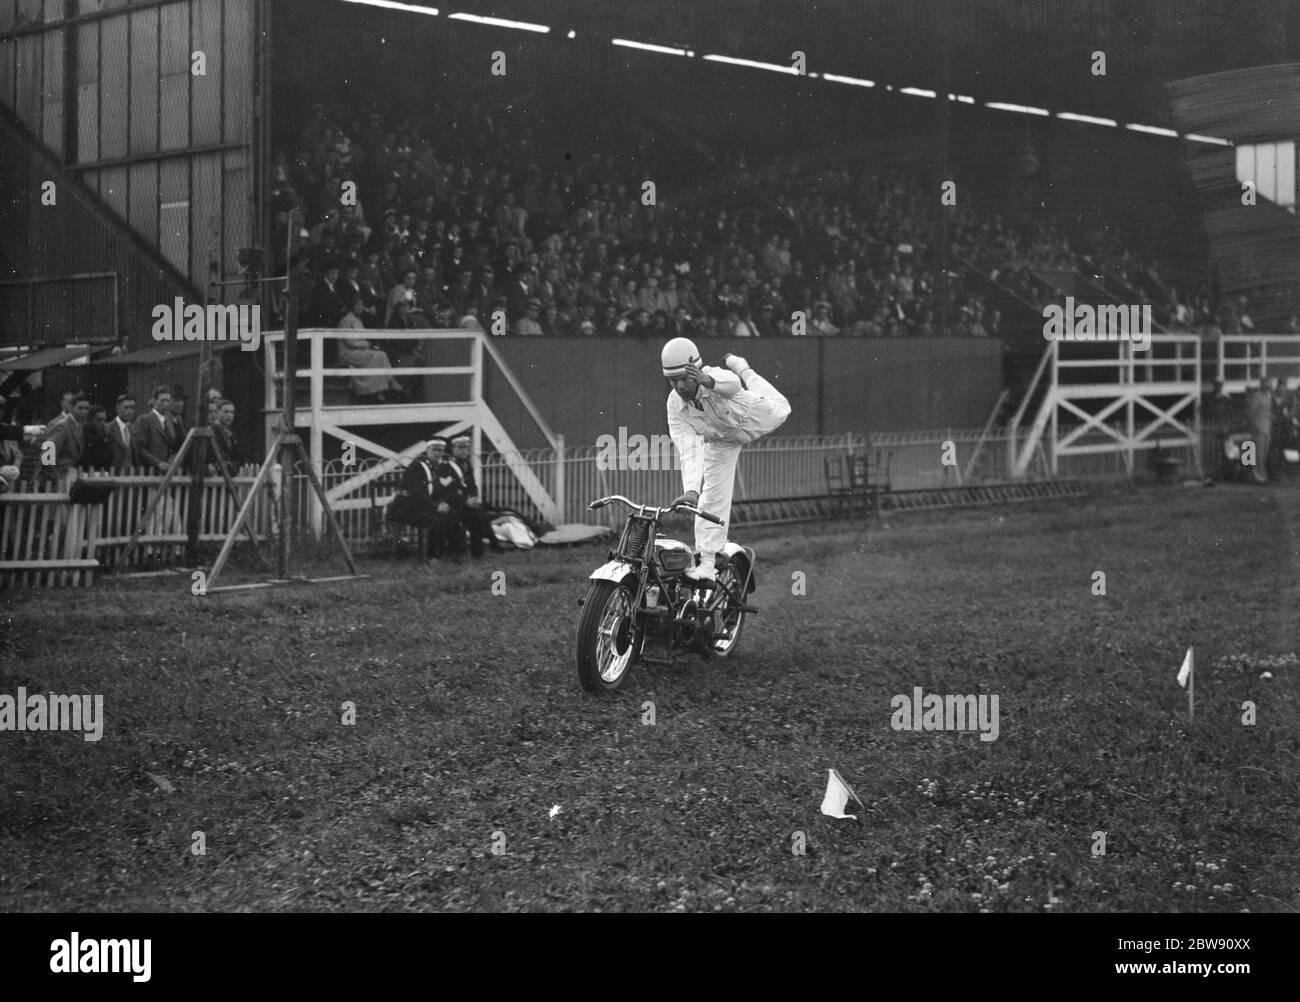 The Gravesend and District Motor Cycle Gymkhana in Kent . World champion Jim Hayhurst performs stunts on his bike in front of spectators . 19 June 1939 Stock Photo